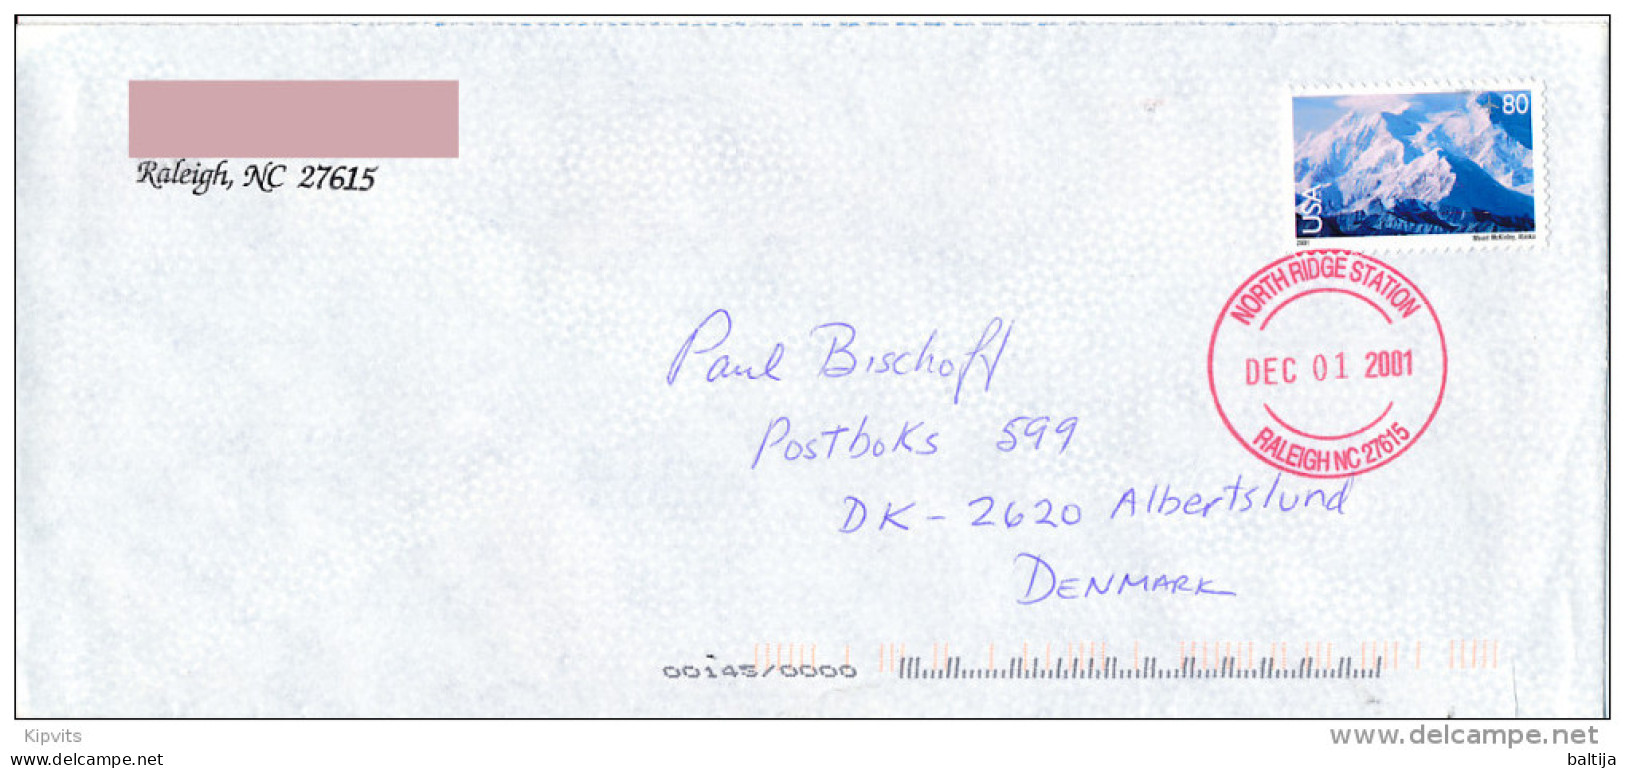 80c Mount McKinley Solo Cover Abroad - December 1, 2001 North Ridge Station Raleigh NC 27615 - Lettres & Documents